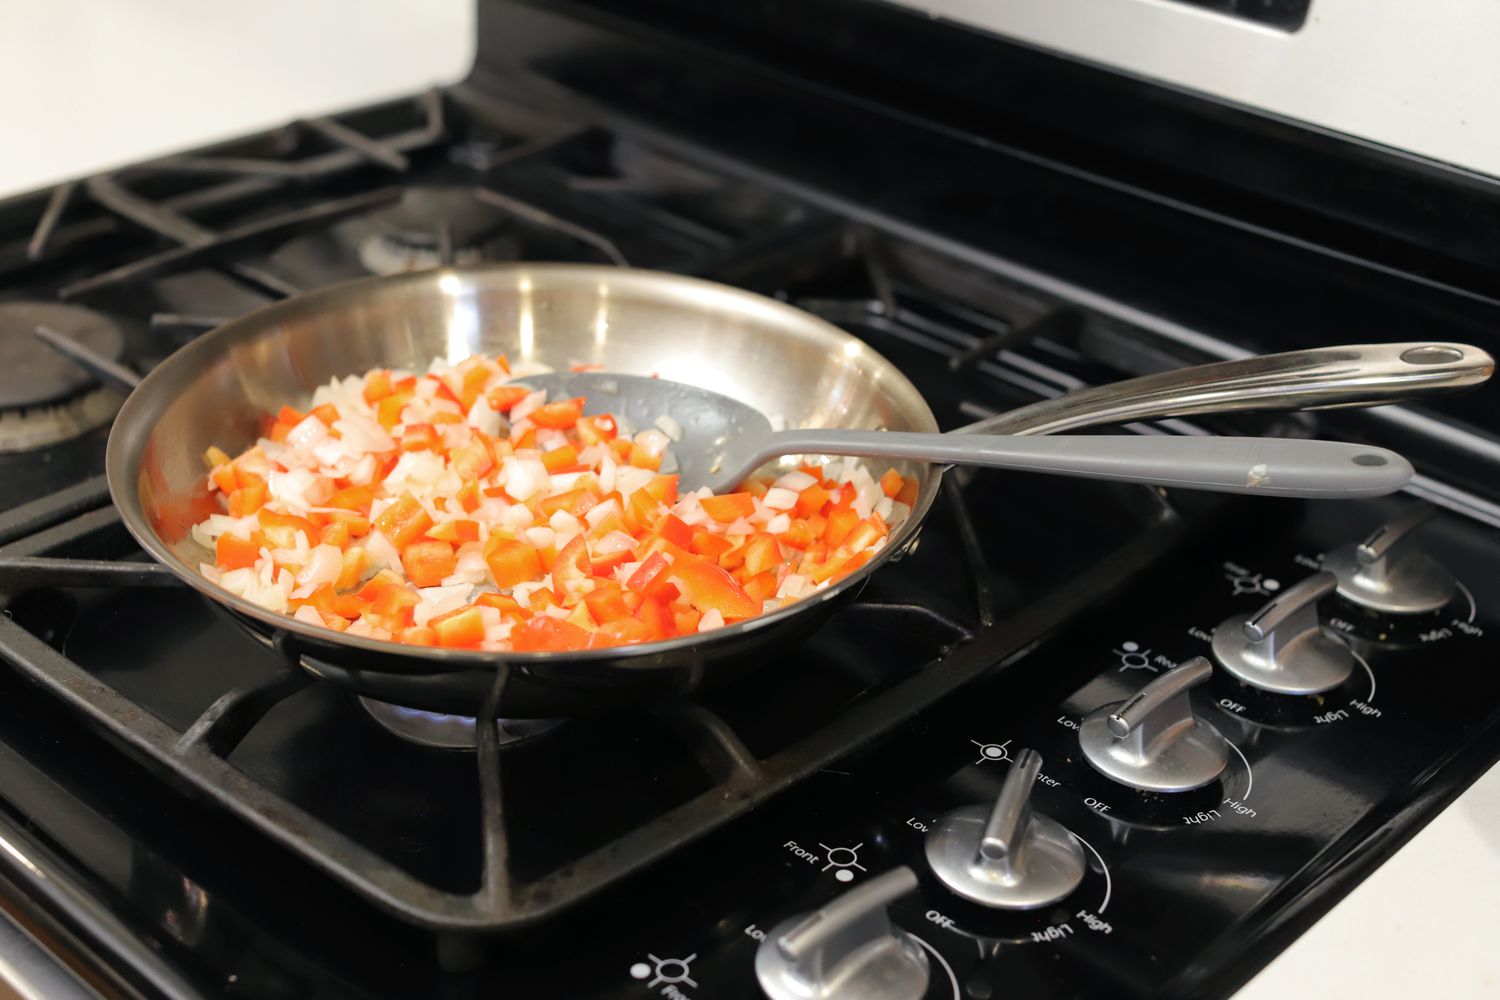 Sauteing vegetable in the All-Clad G5 frying pan on a gas stove